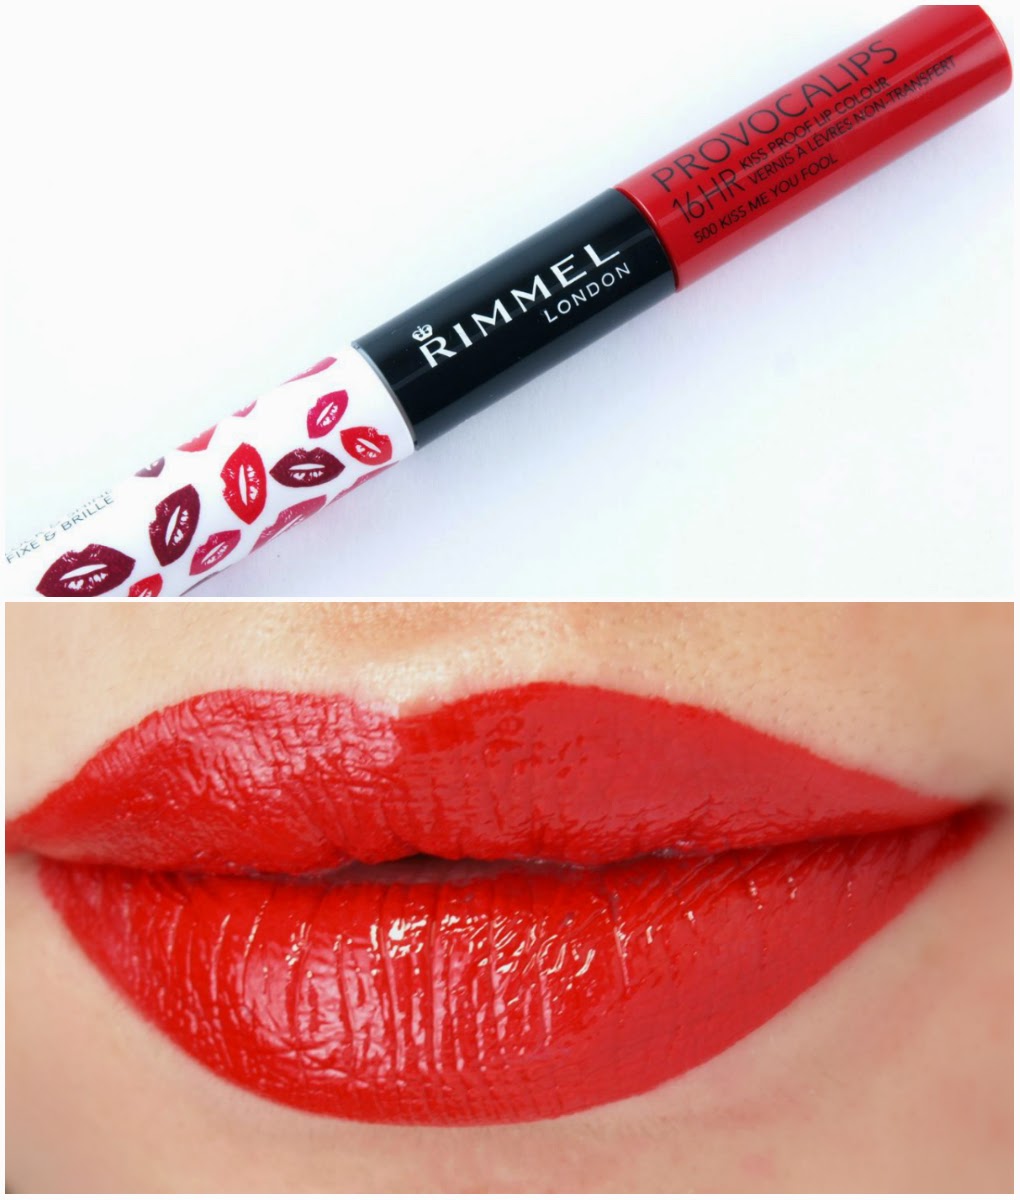 Rimmel Provocalips 16Hr Kiss Proof Lip Color: Review and Swatches Kiss Me You Fool